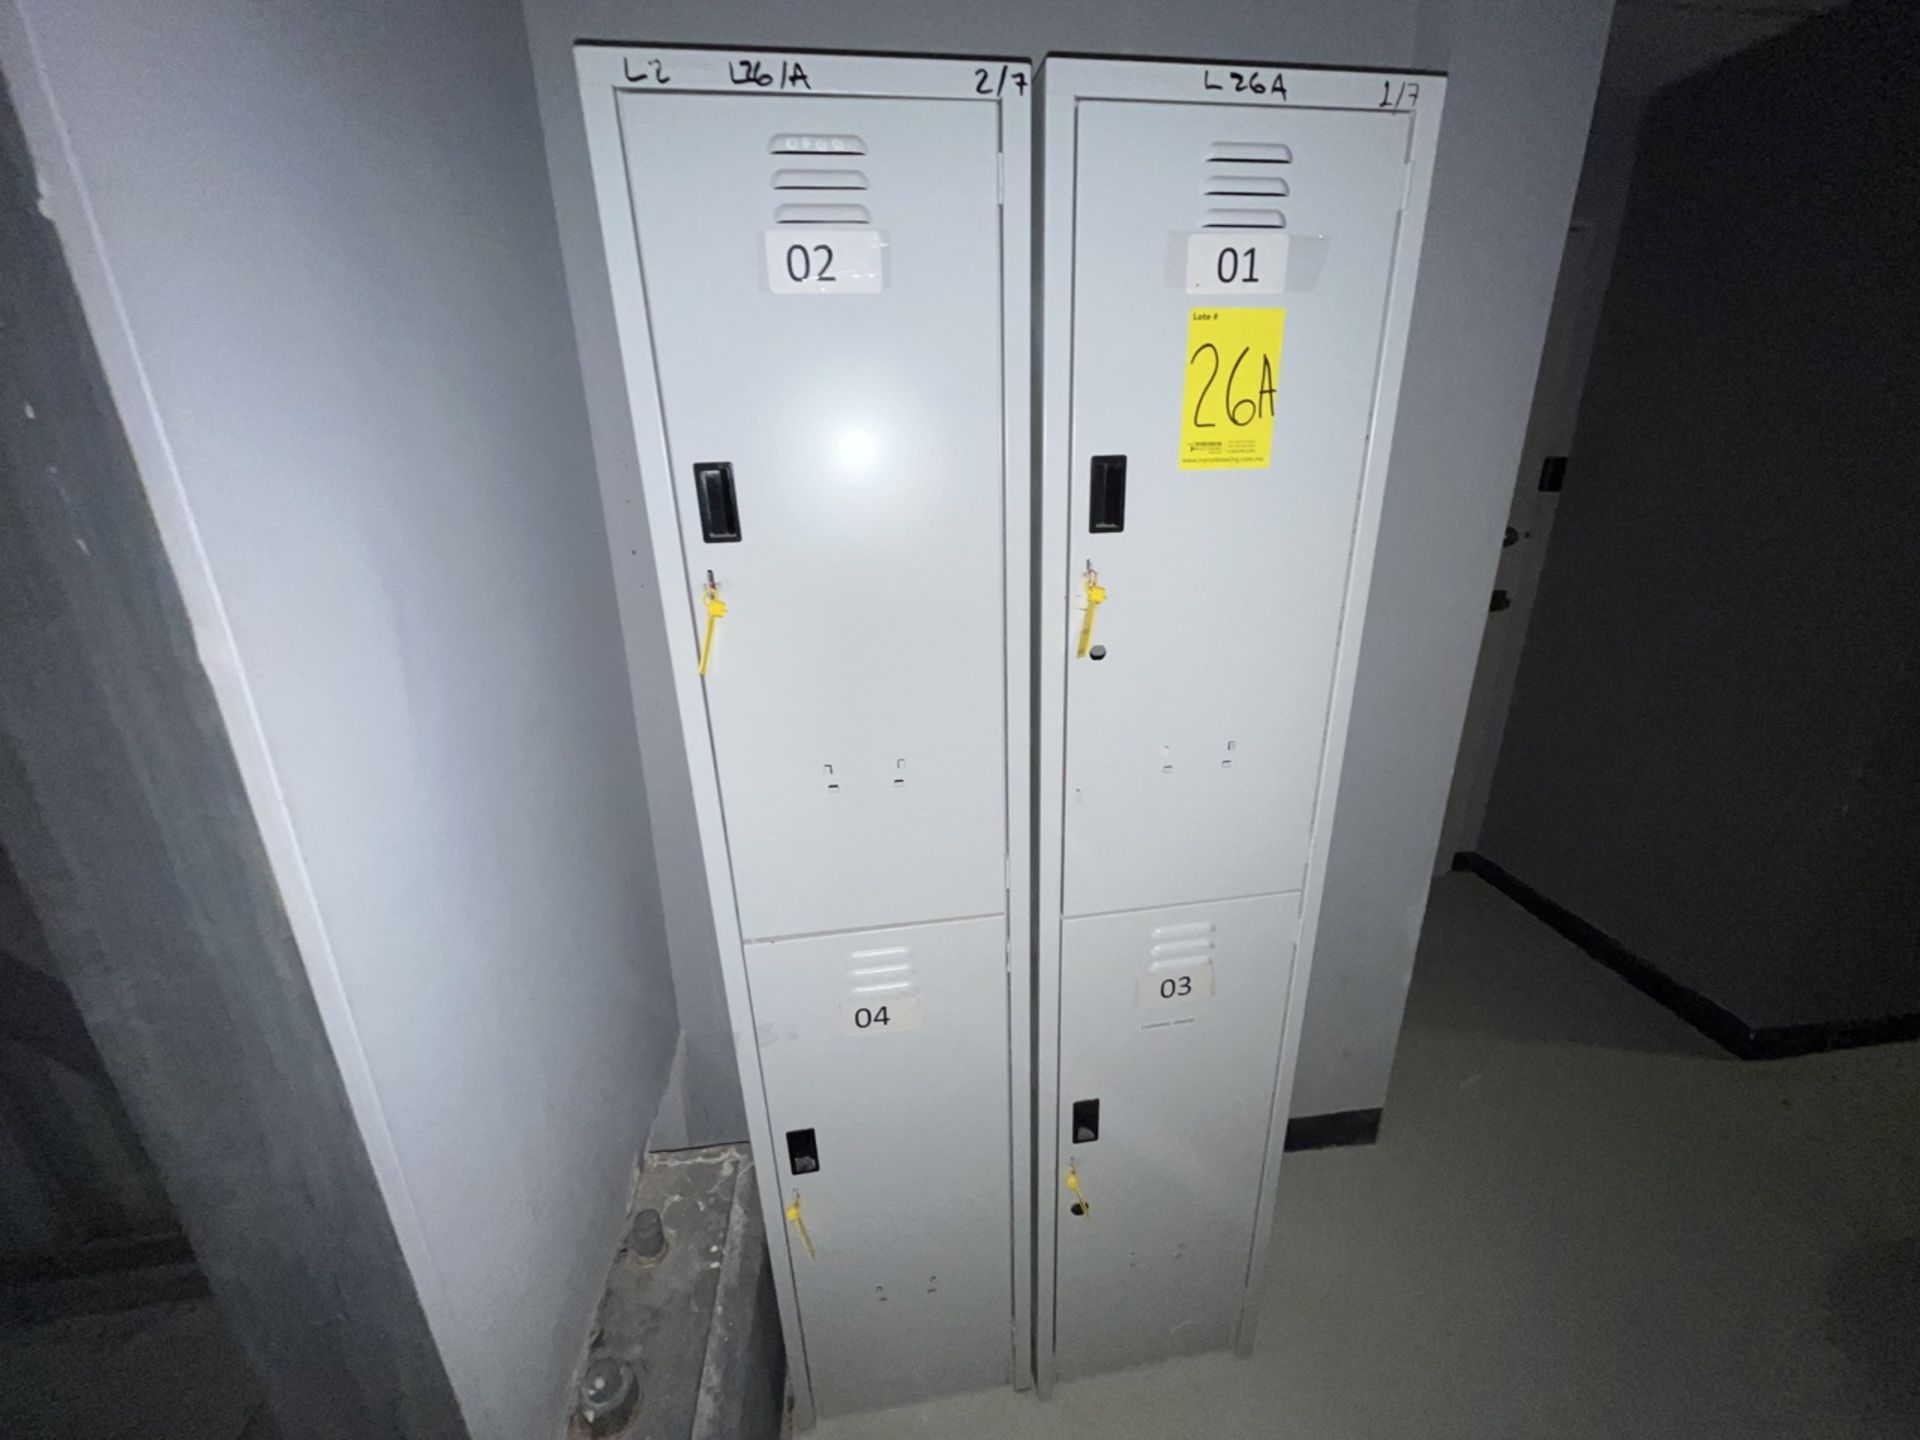 Lot of 7 storage lockers of 2 spaces each, measuring approximately 0.40 x 0.40 x 1.80 meters. / Lo - Image 6 of 8